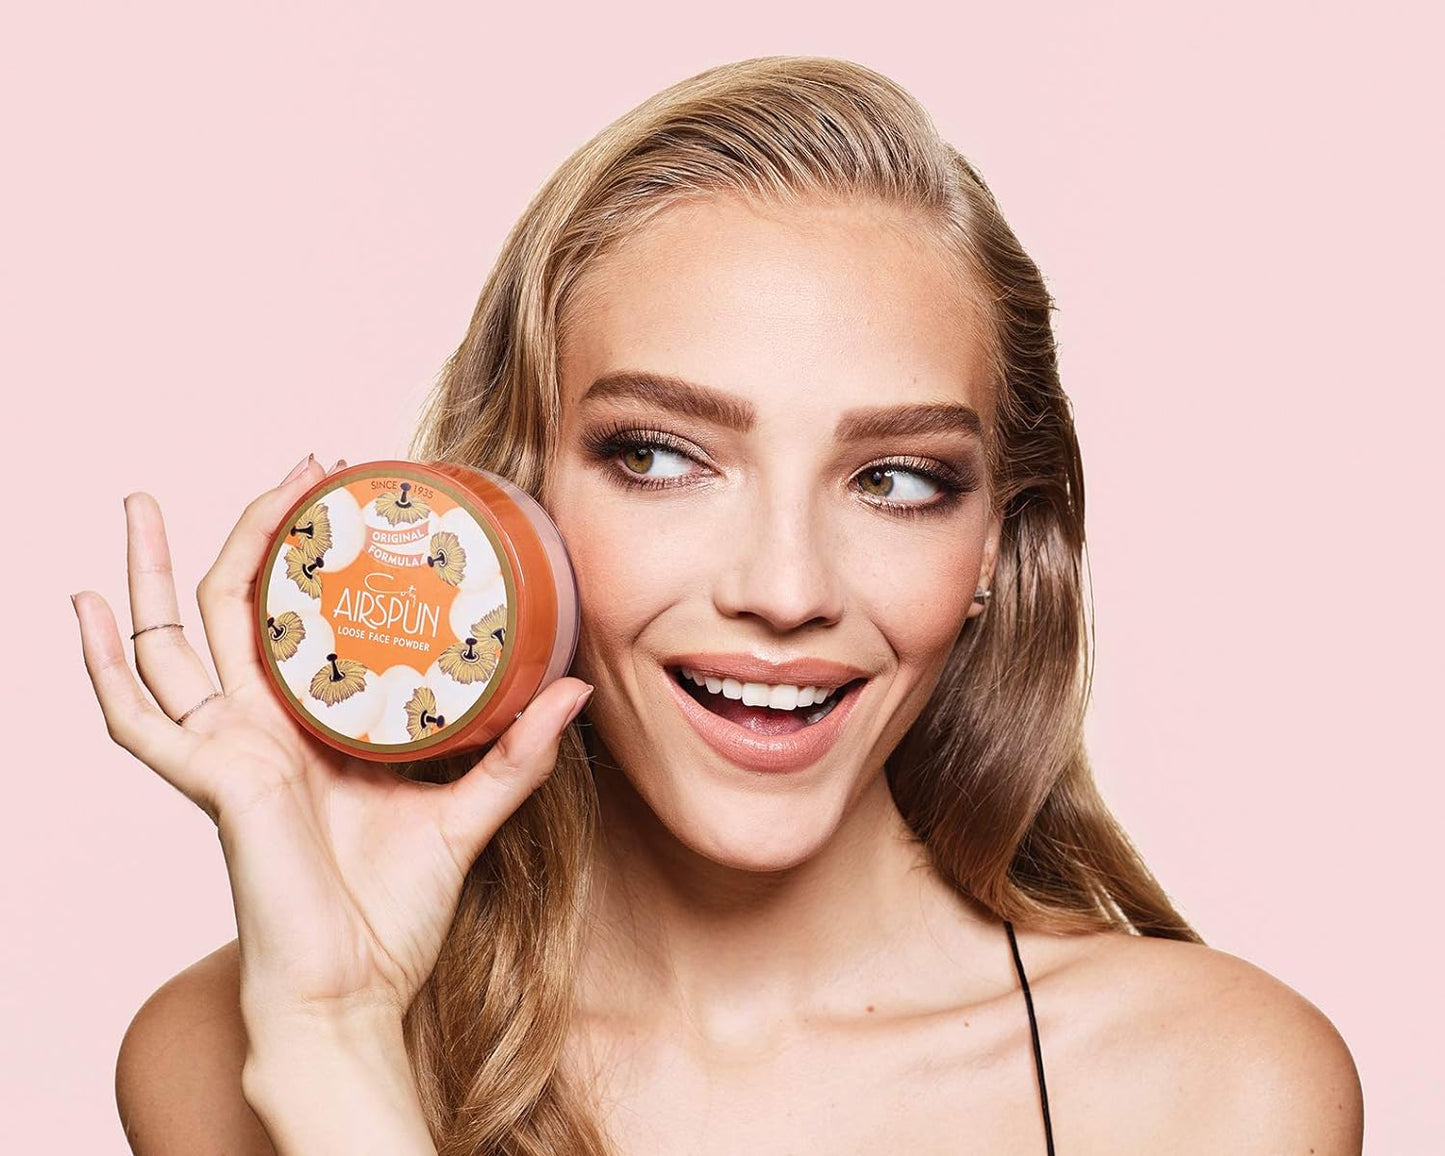 Coty Airspun Loose Face Powder- Translucent Extra Coverage 35g